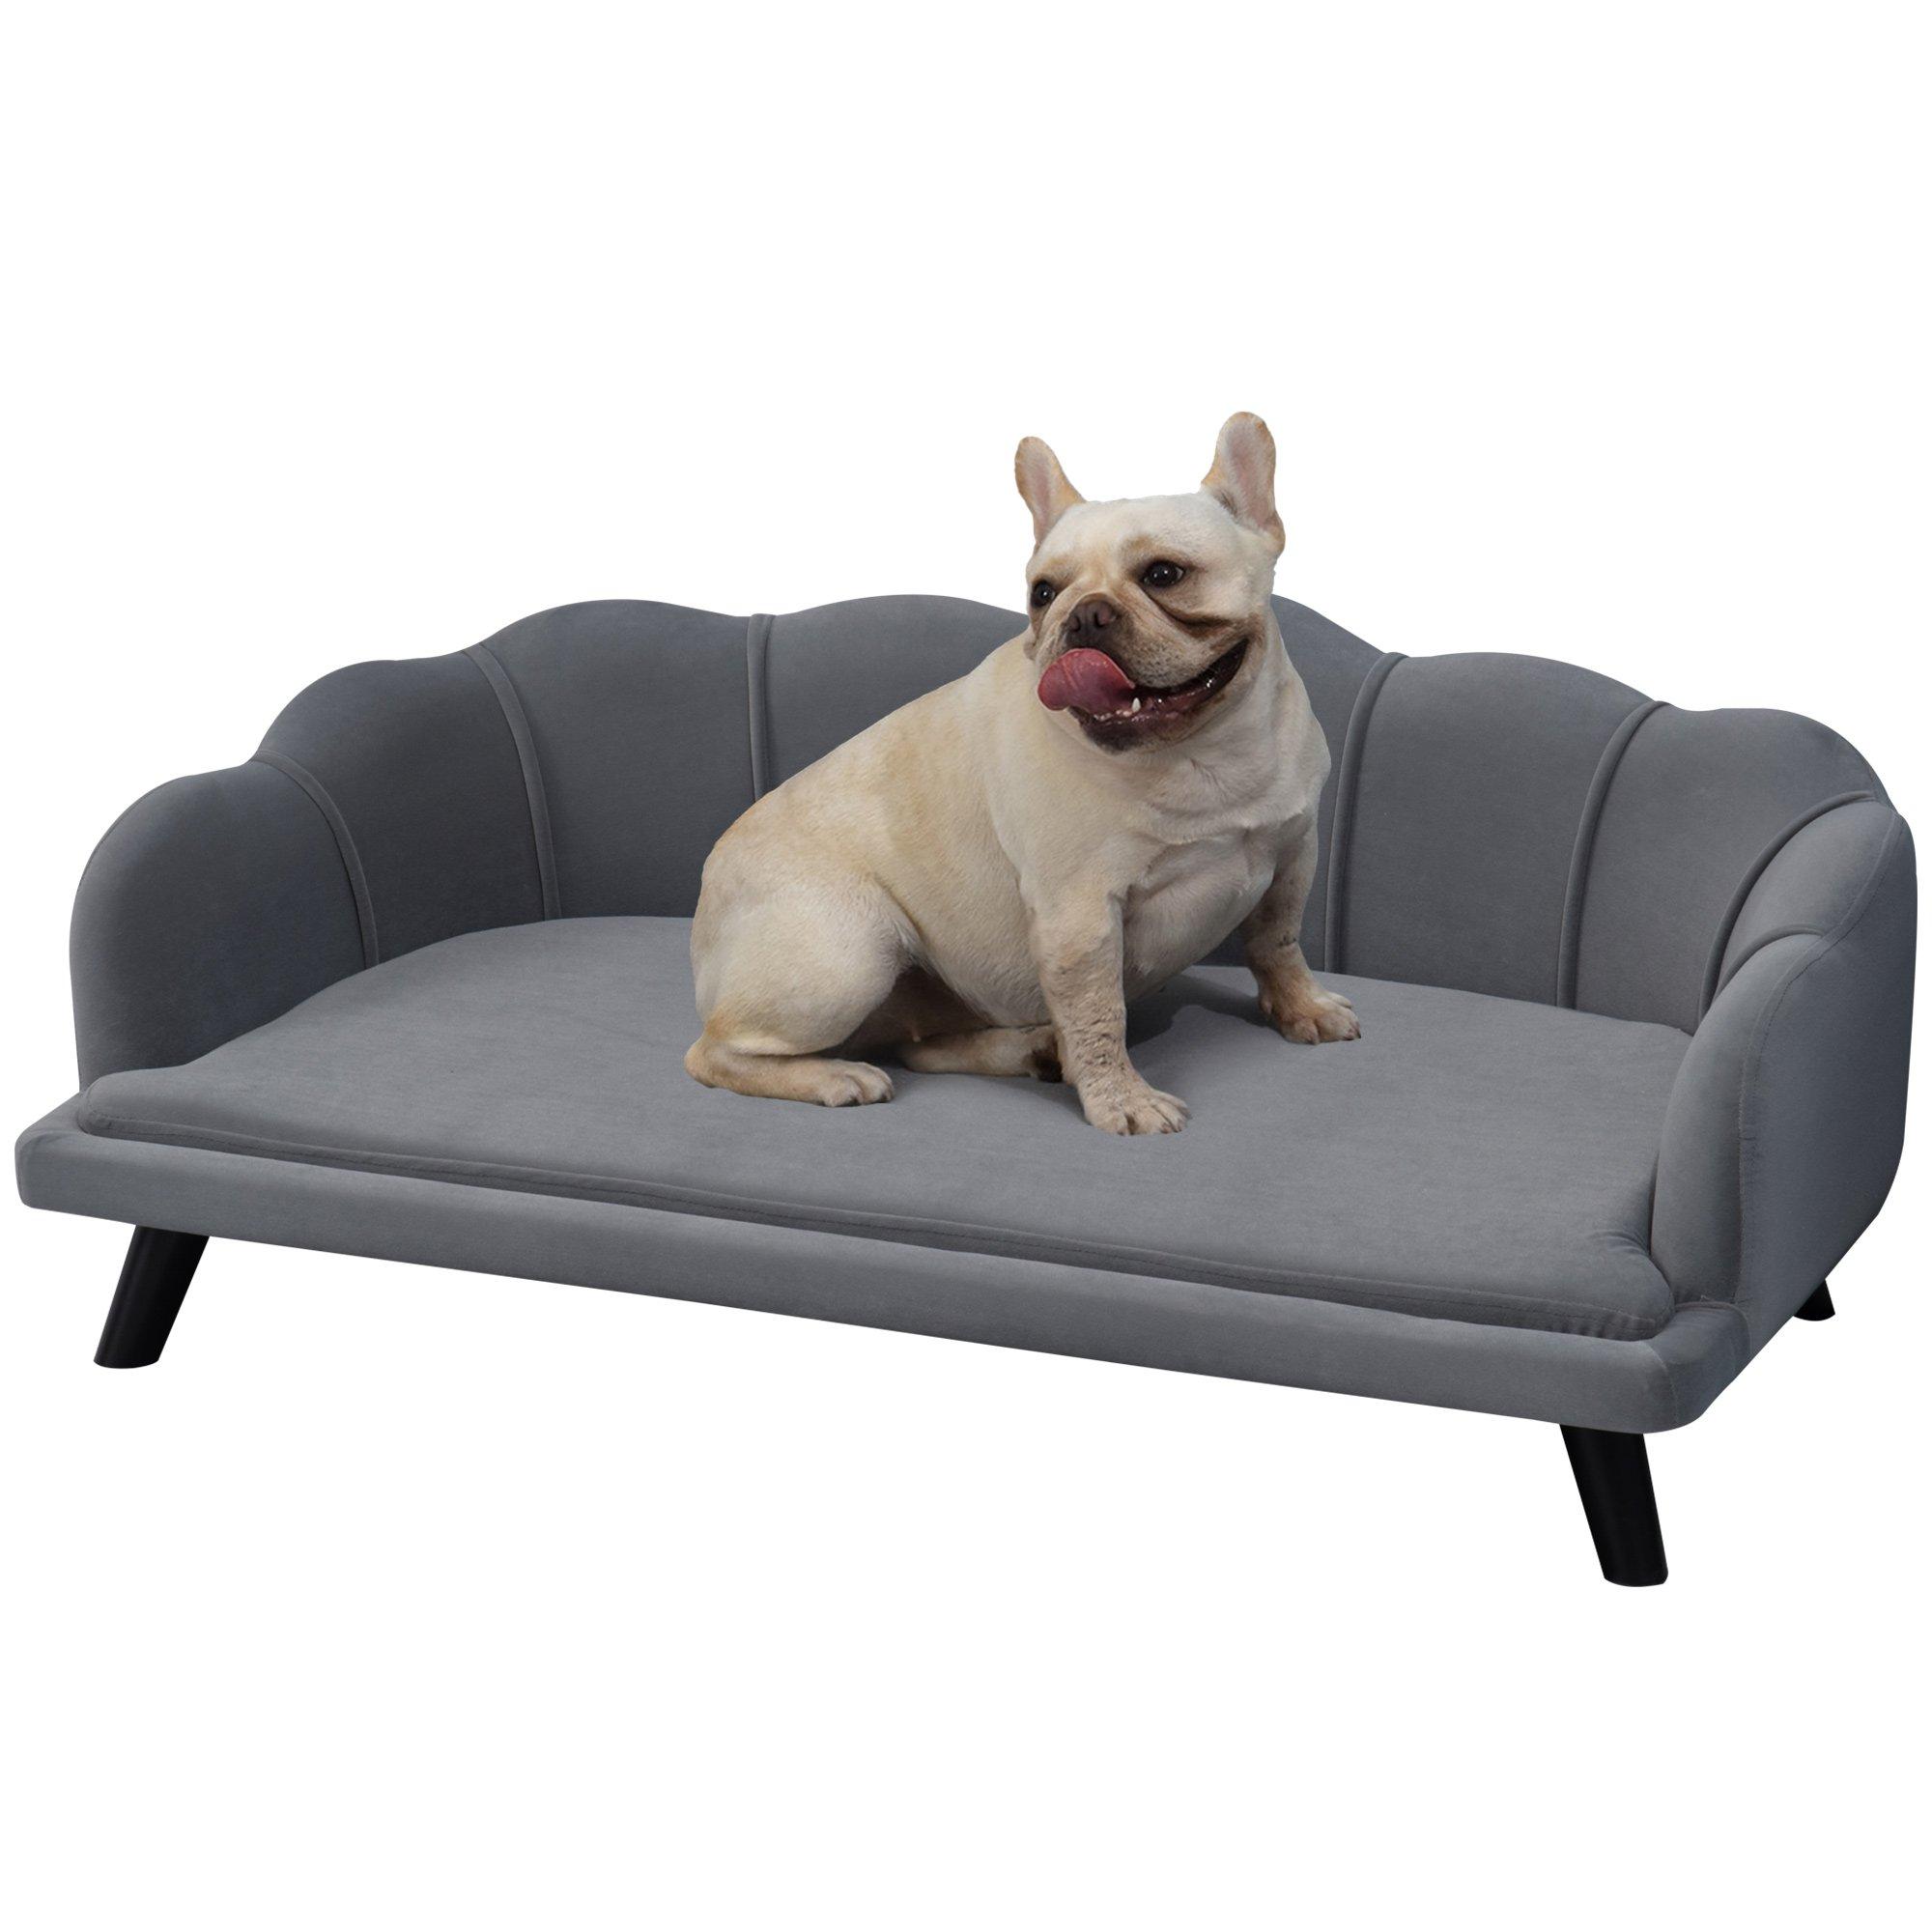 Shell-Shaped Pet Sofa for Medium, Large Dogs with Legs, Cushion